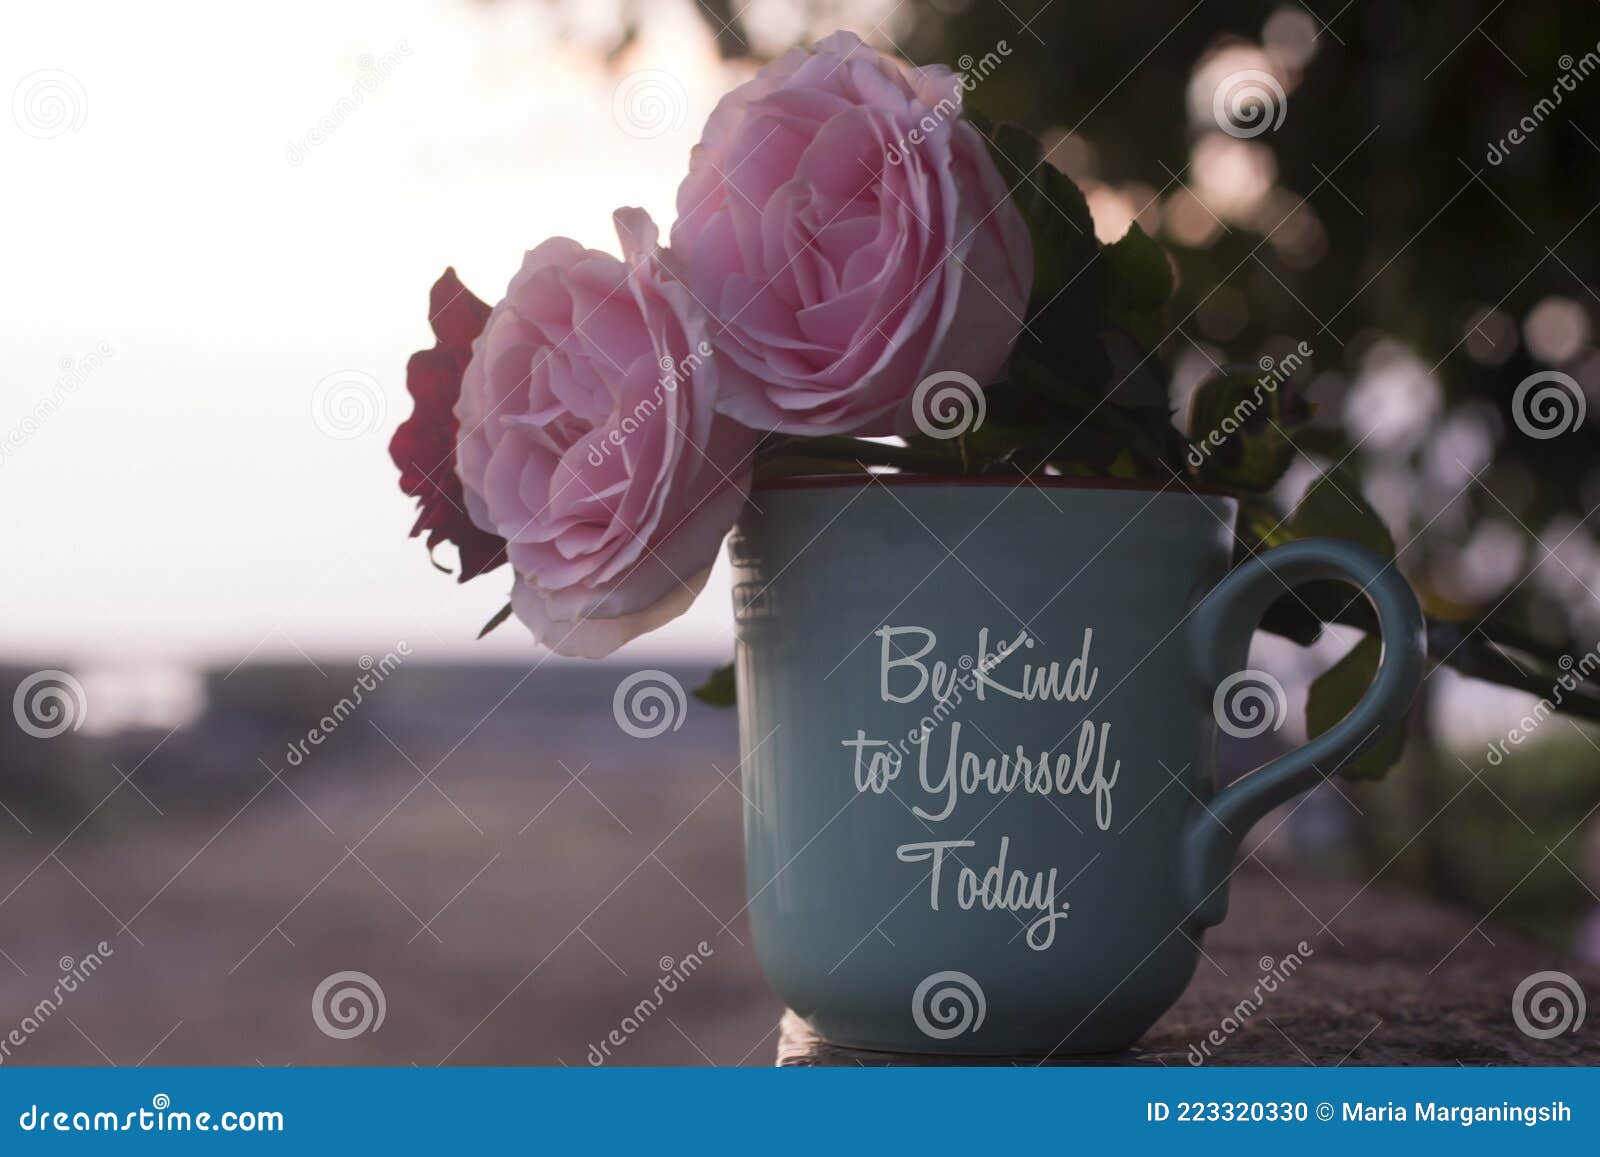 self love and care inspirational quote on coffee cup - be kind to  yourself today. with pink roses and coffee cup vase decoration.